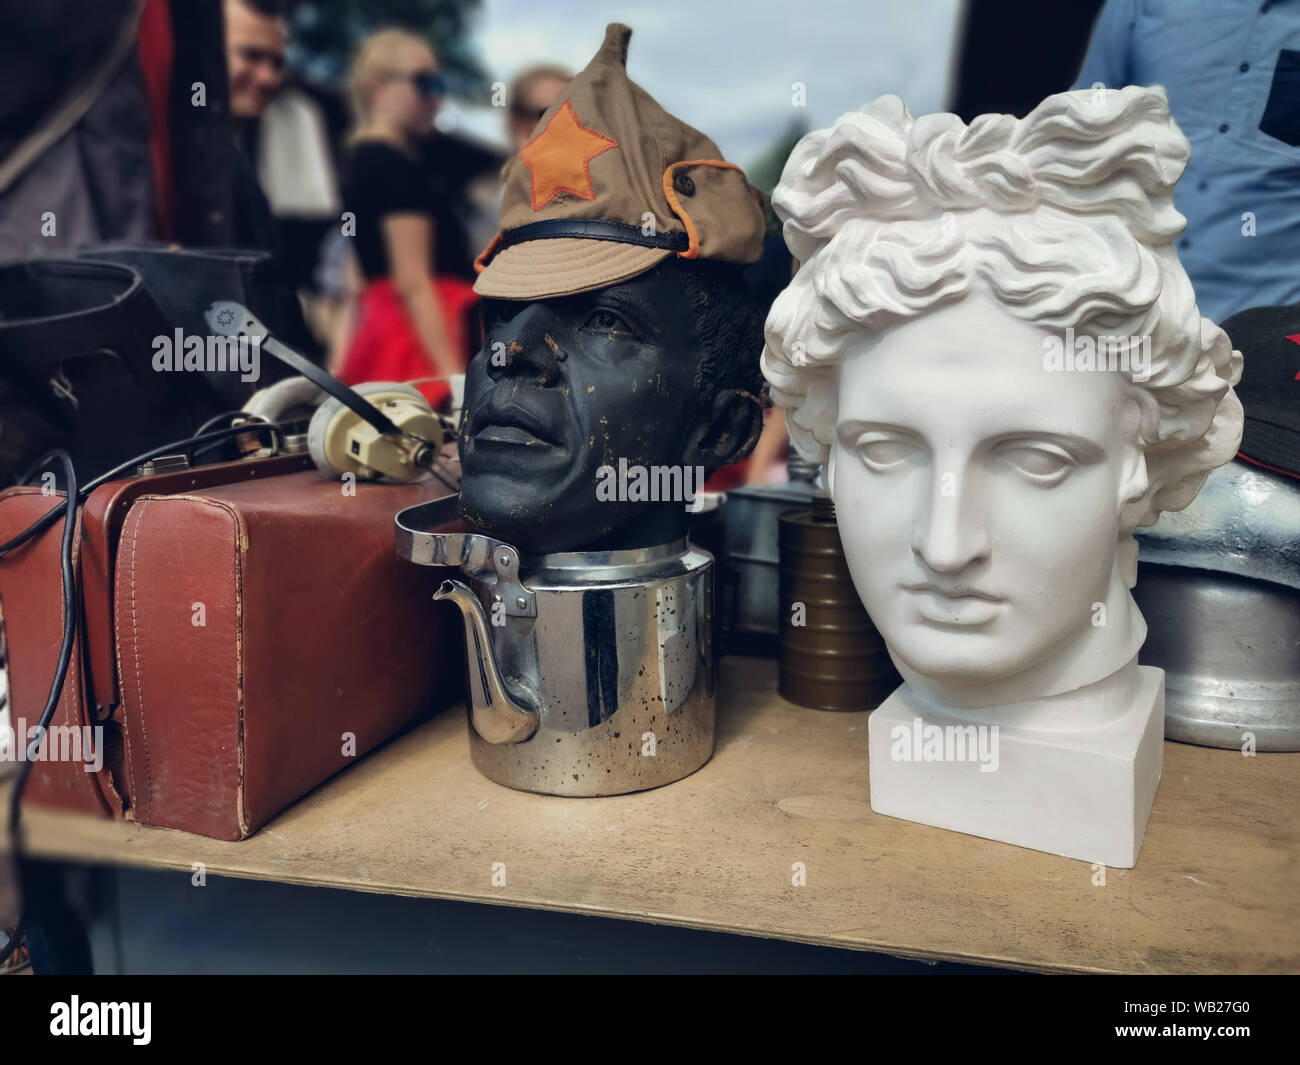 Saint-Petersburg, Russia - 22 July 2019: cap Soviet times revolution on a mannequin, and plaster head of Apollo at the Flea market. Stock Photo